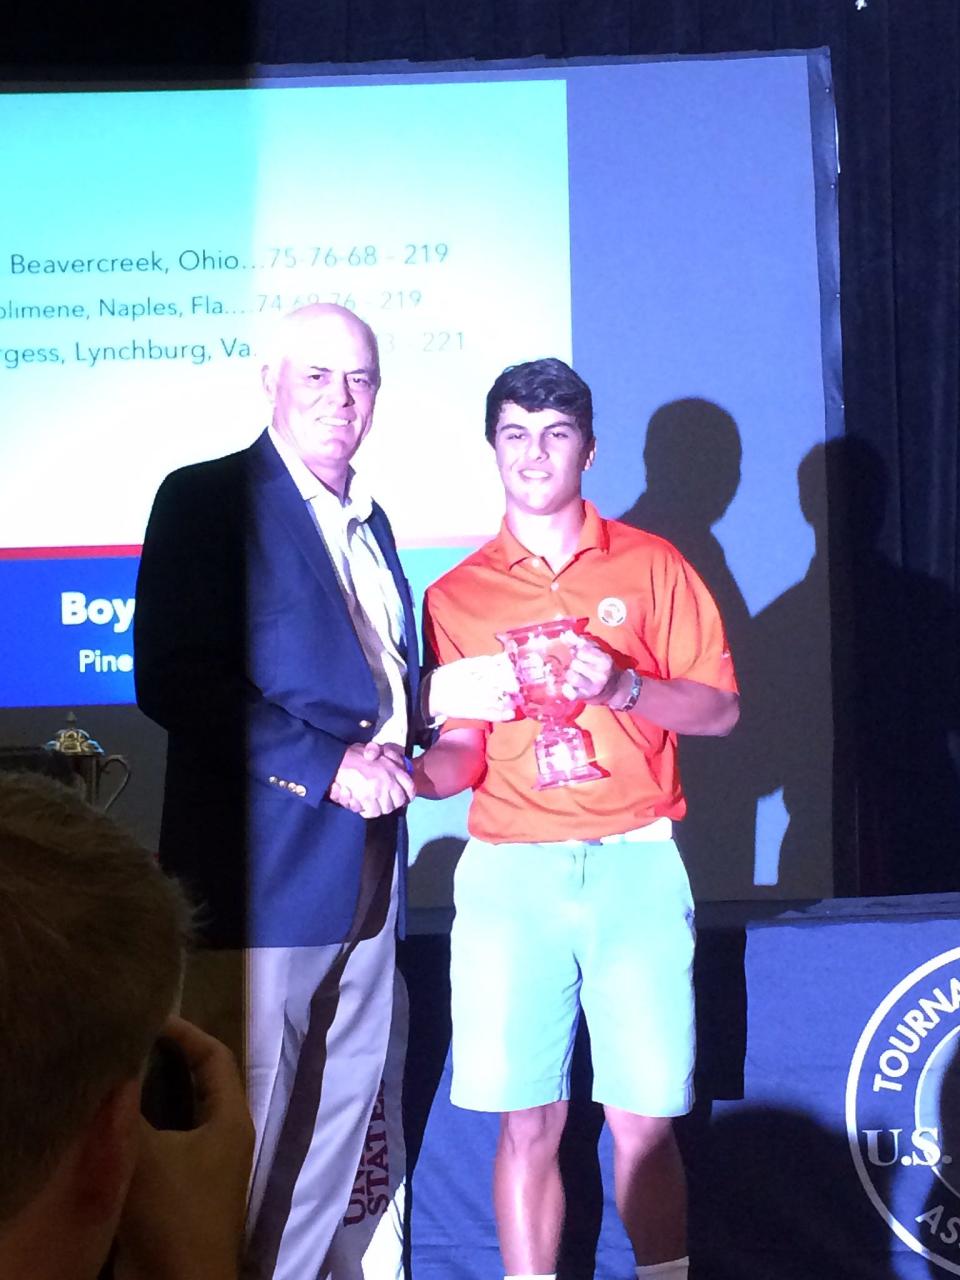 Nick Solimene, 17, of Naples, accepts the bronze trophy after tied for third in the U.S. Kids Golf teen world championship.